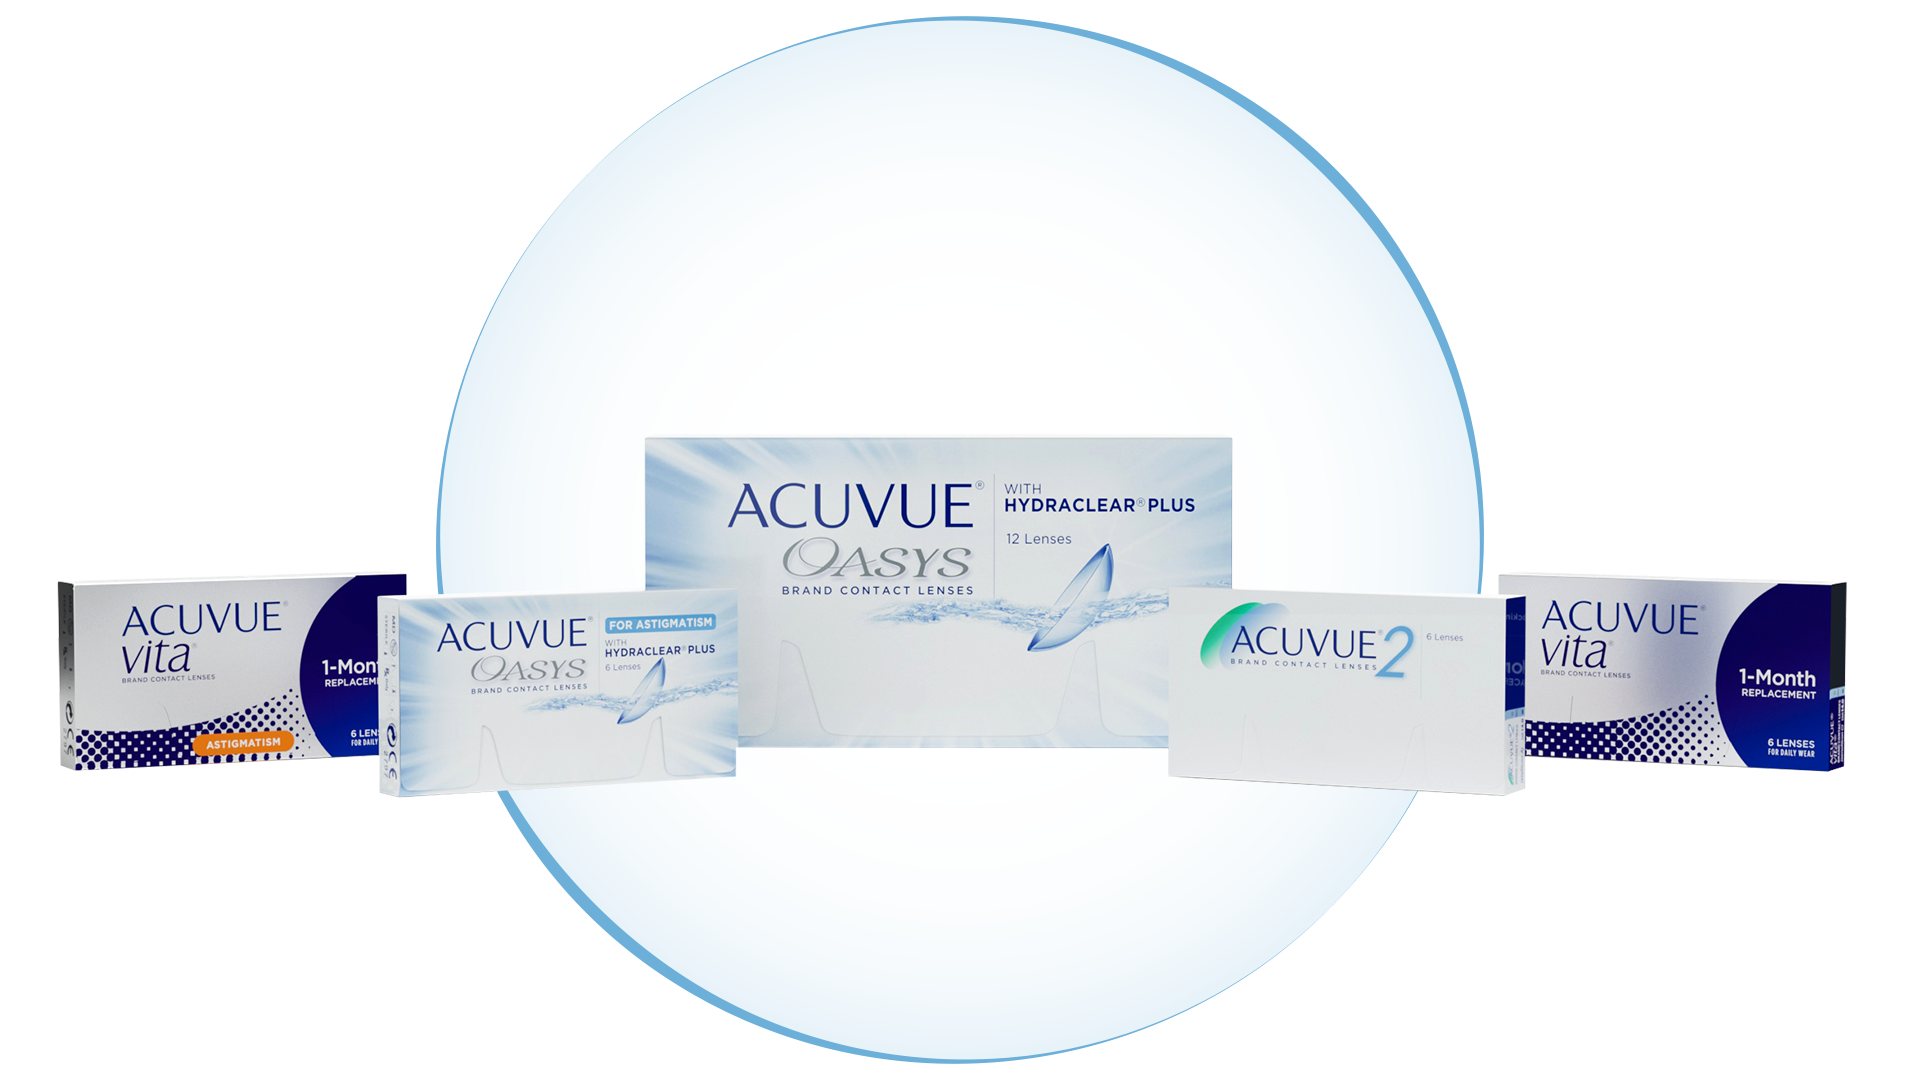 Assortment of ACUVUE contact lens boxes.